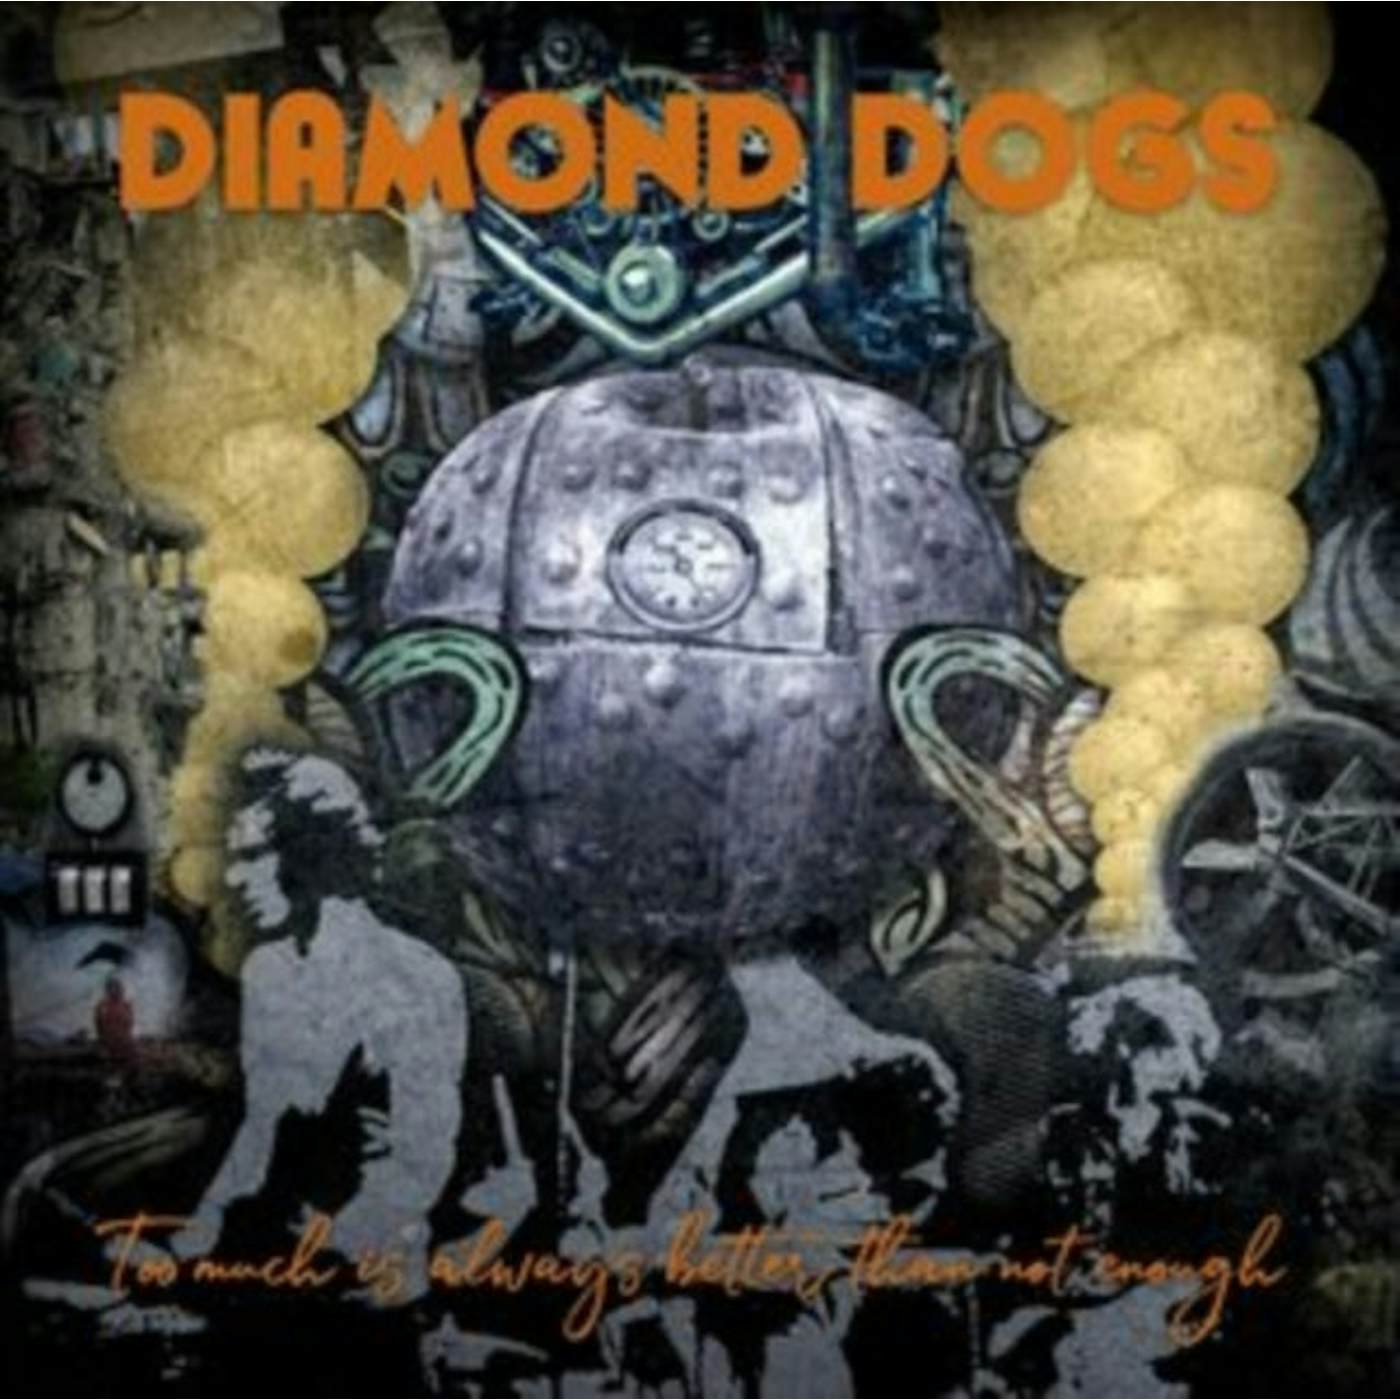 Diamond Dogs LP - Too Much Is Always Better Than Not Enough (Orange Vinyl)